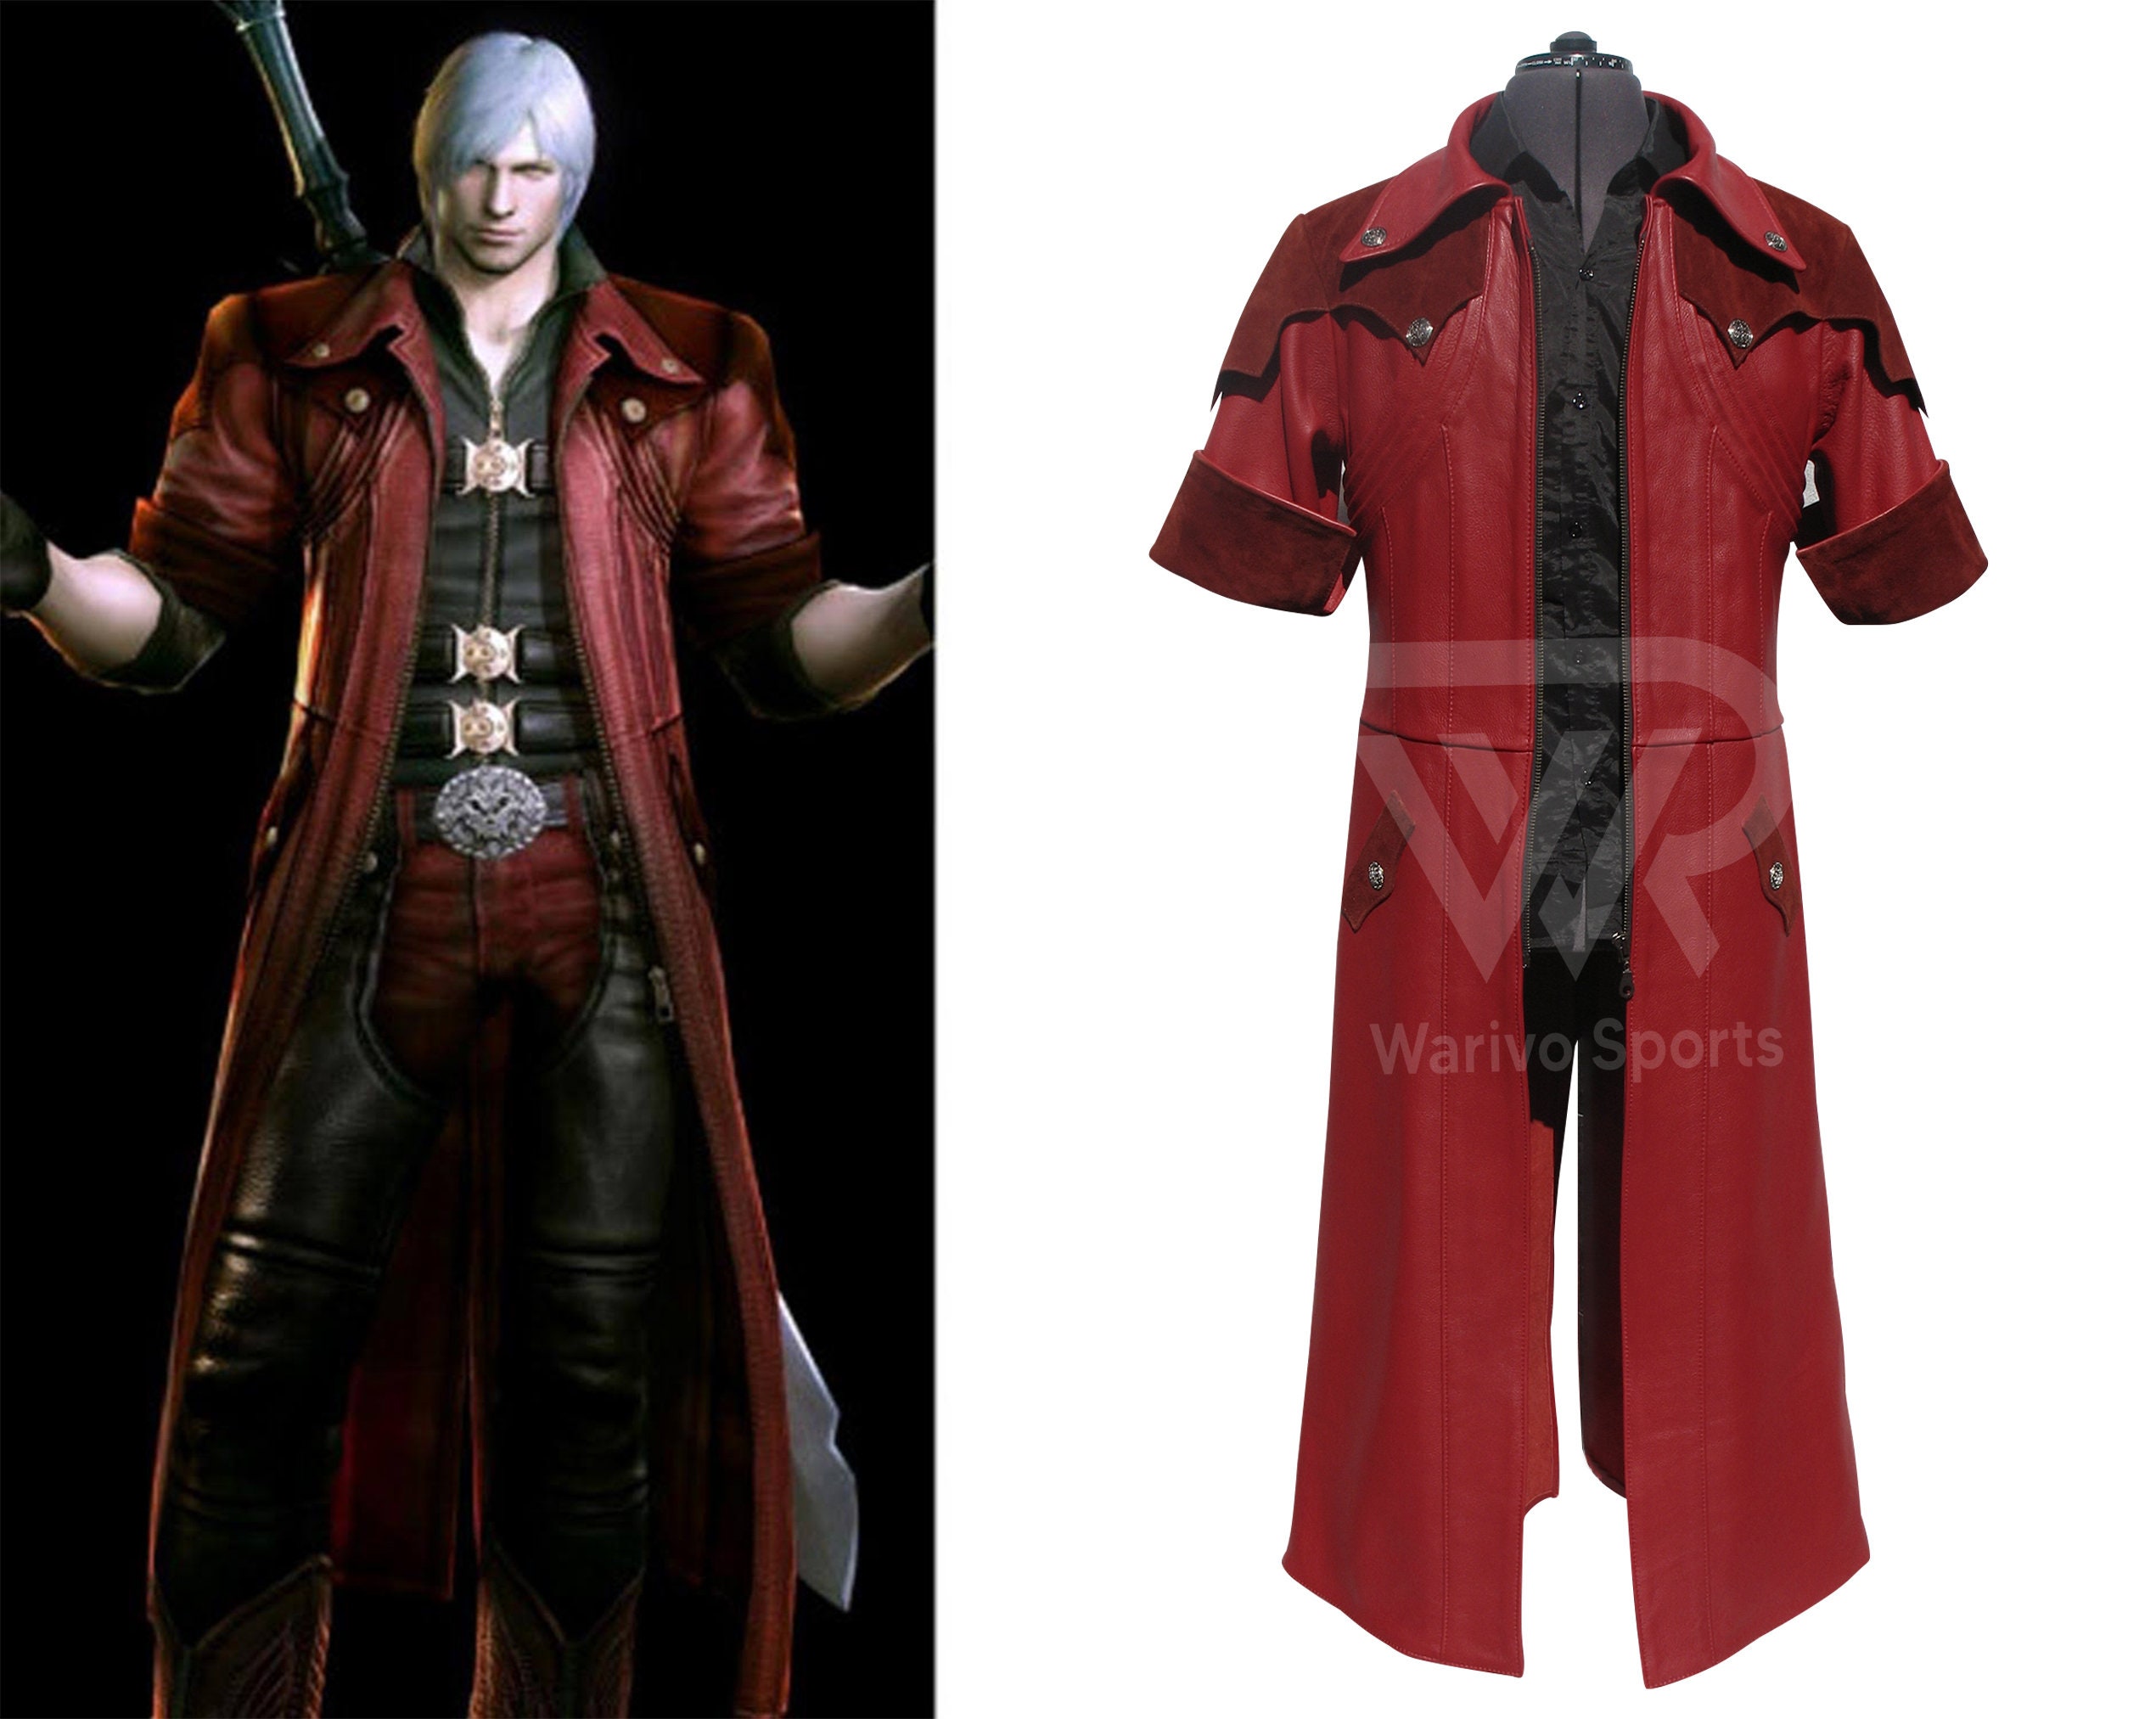 Dante and Vergil DMC3 Devil May Cry 3 11x17 